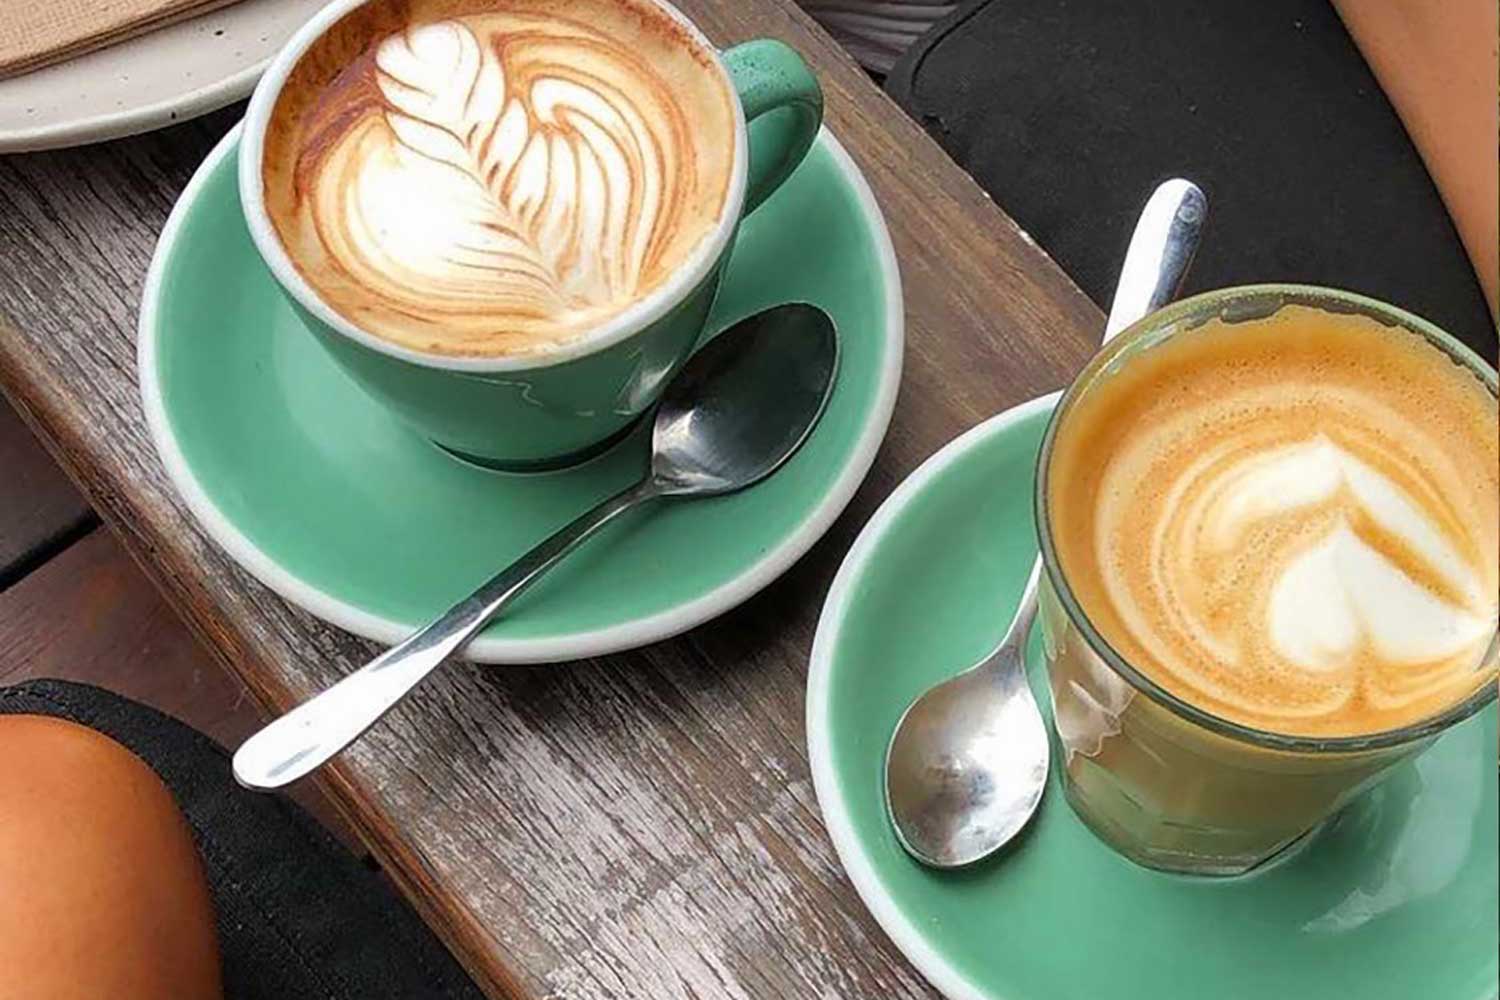 Flat White Vs Latte: What’s The Difference?